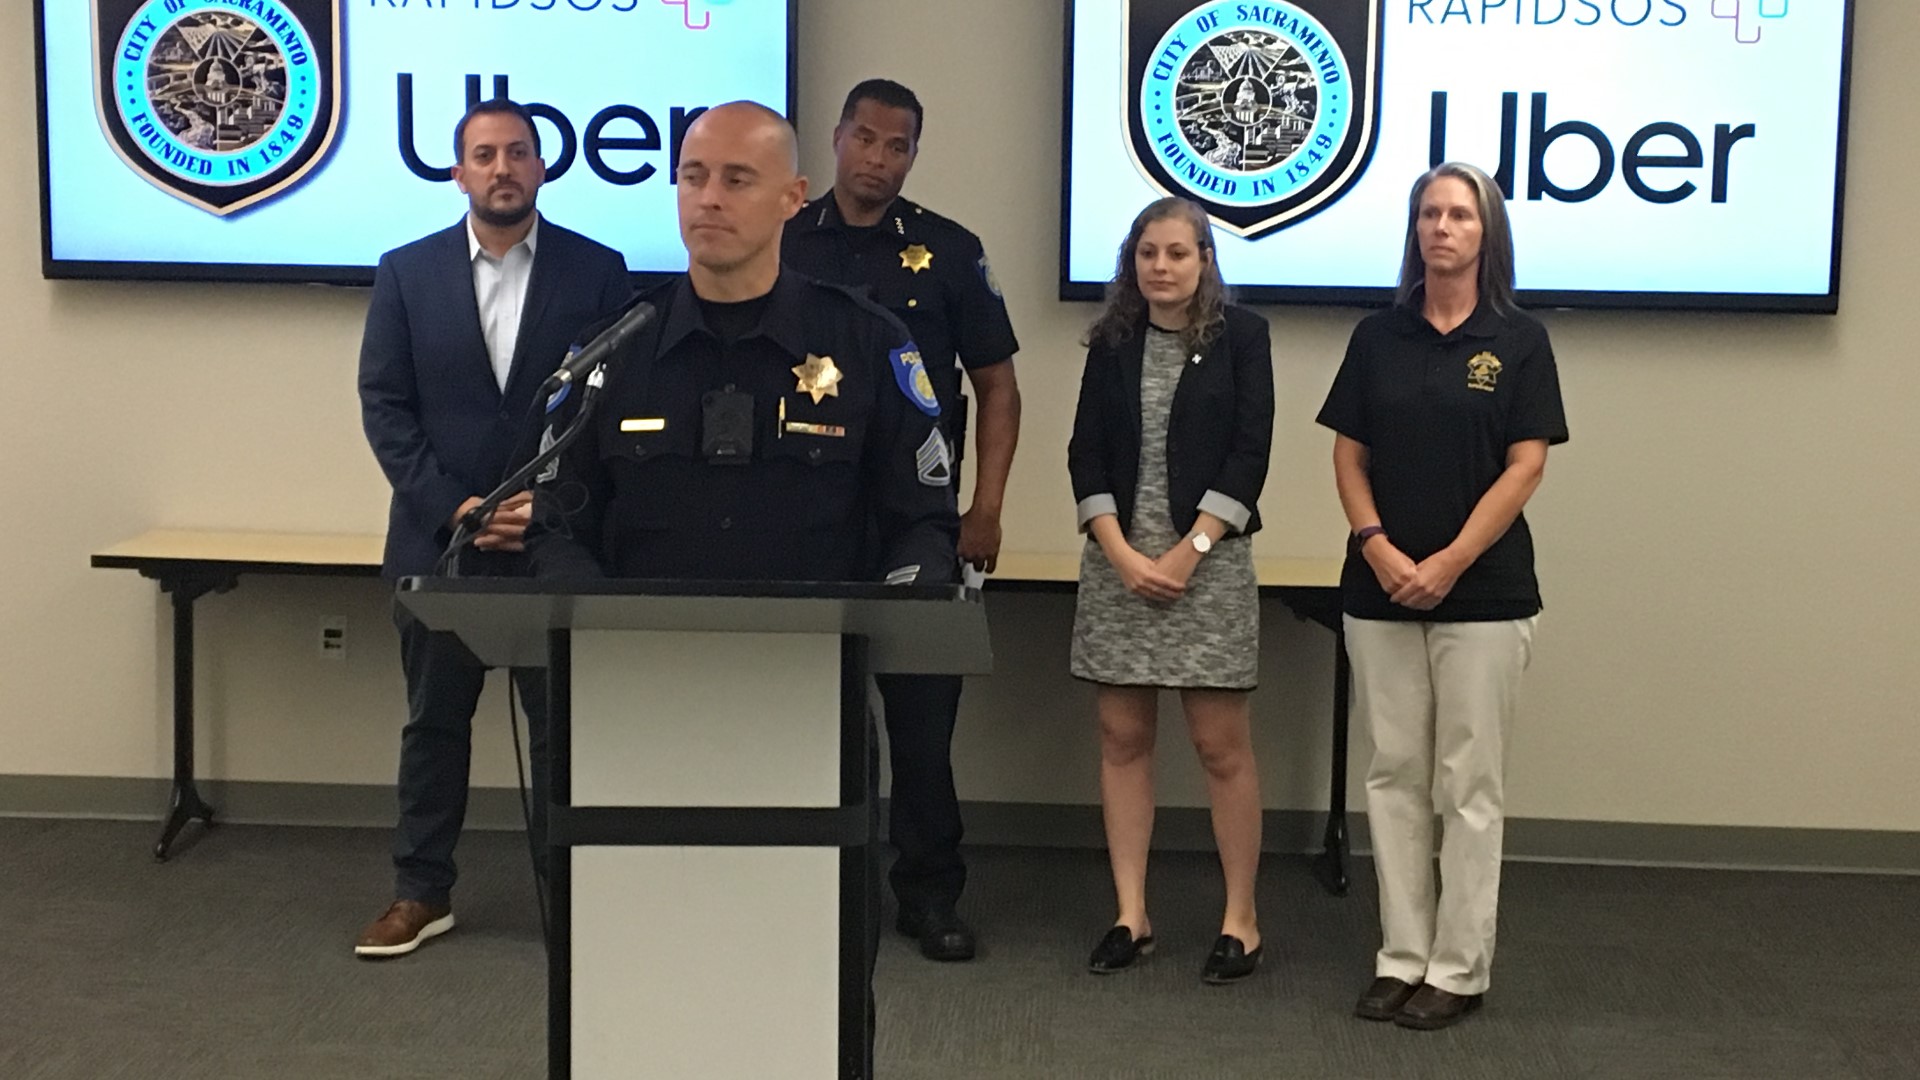 Anyone who uses the app can now call 911 directly on the app. Additional data is automatically sent to the call center and made available for the dispatcher.